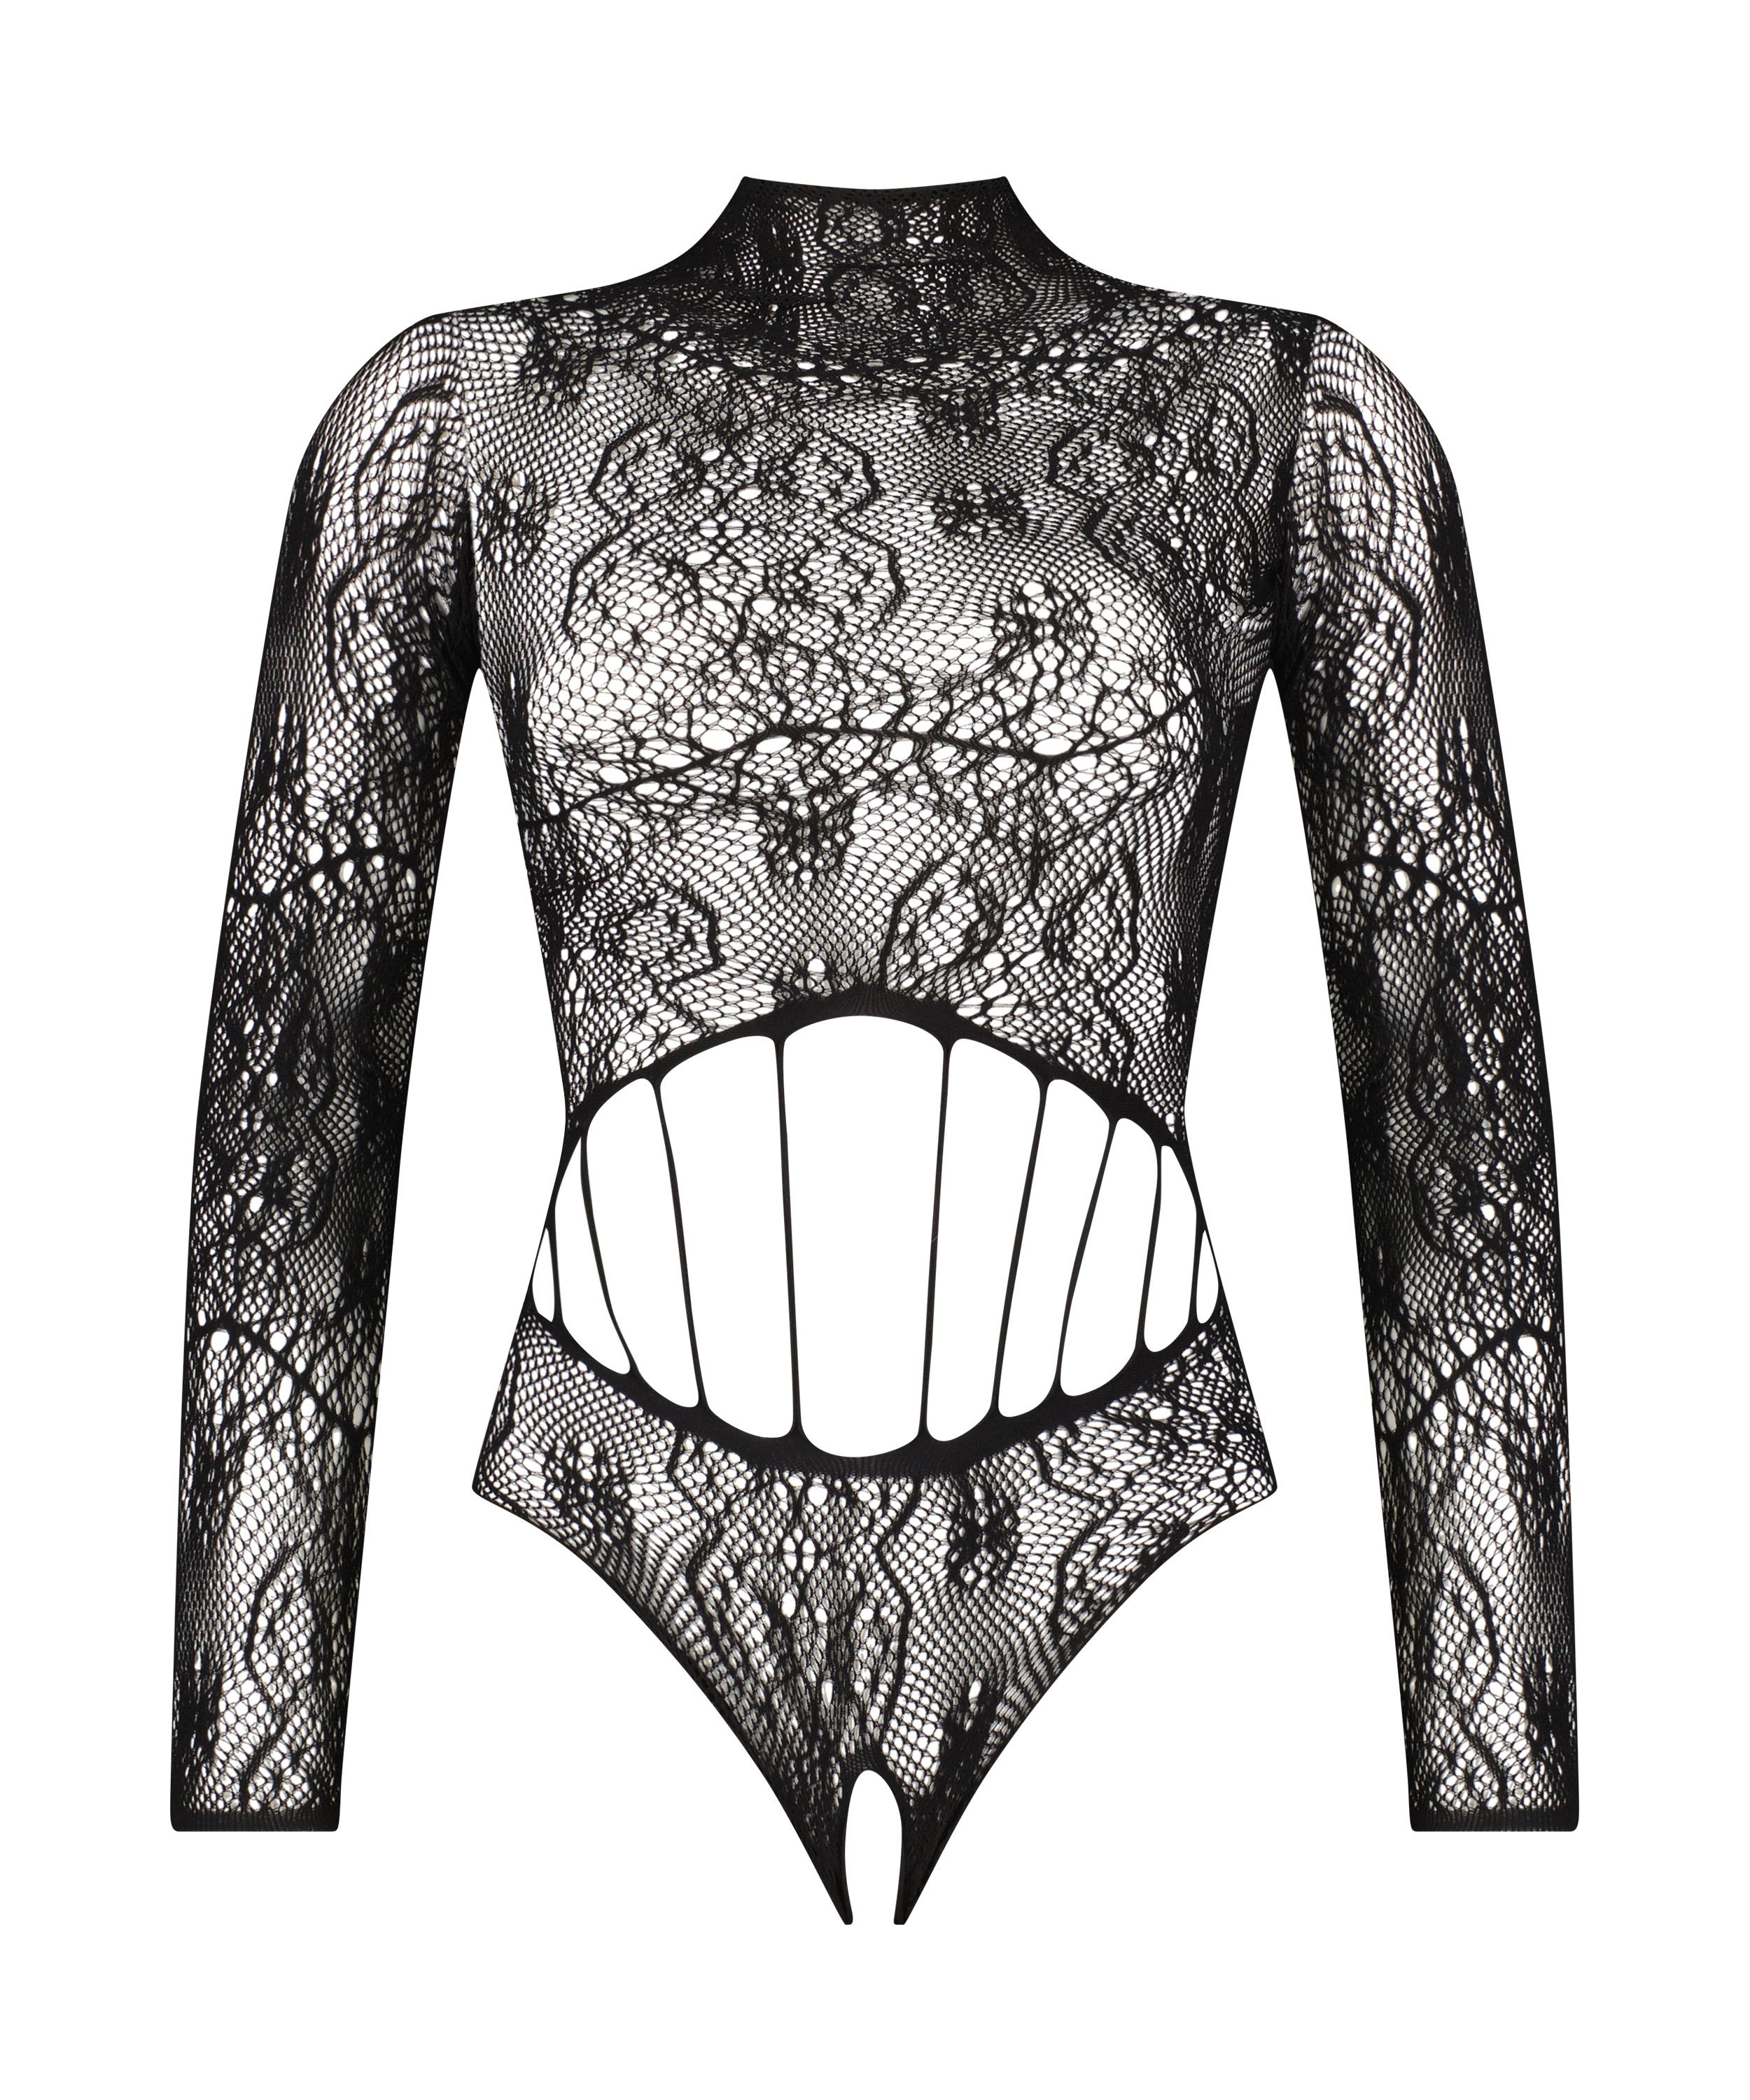 Flora Private Open Crotch Bodysuit for £29 - Private Collection ...